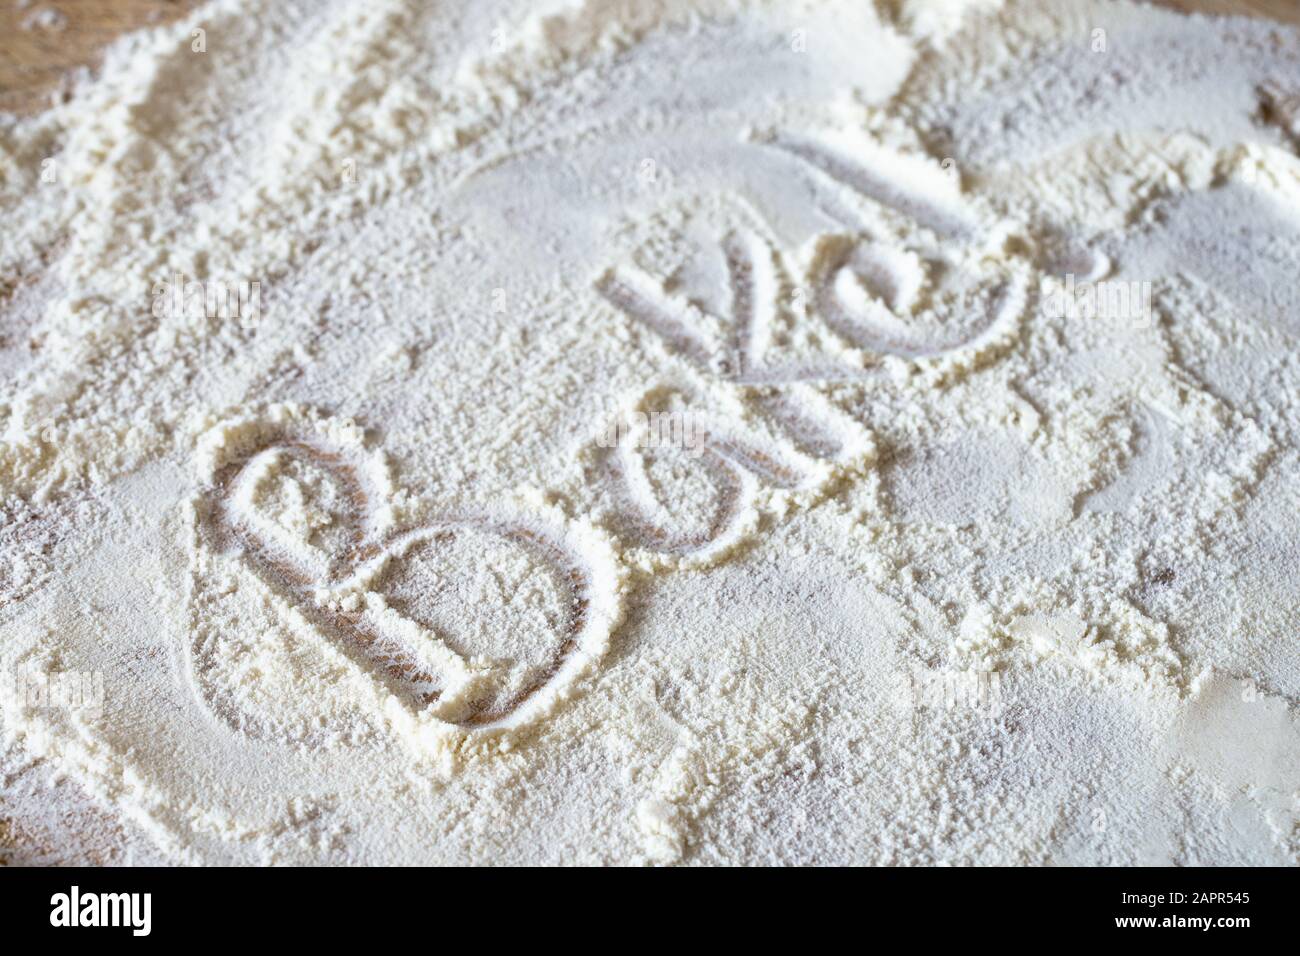 The word 'Bake!' written into messily scattered flour revealing wooden board below. Stock Photo